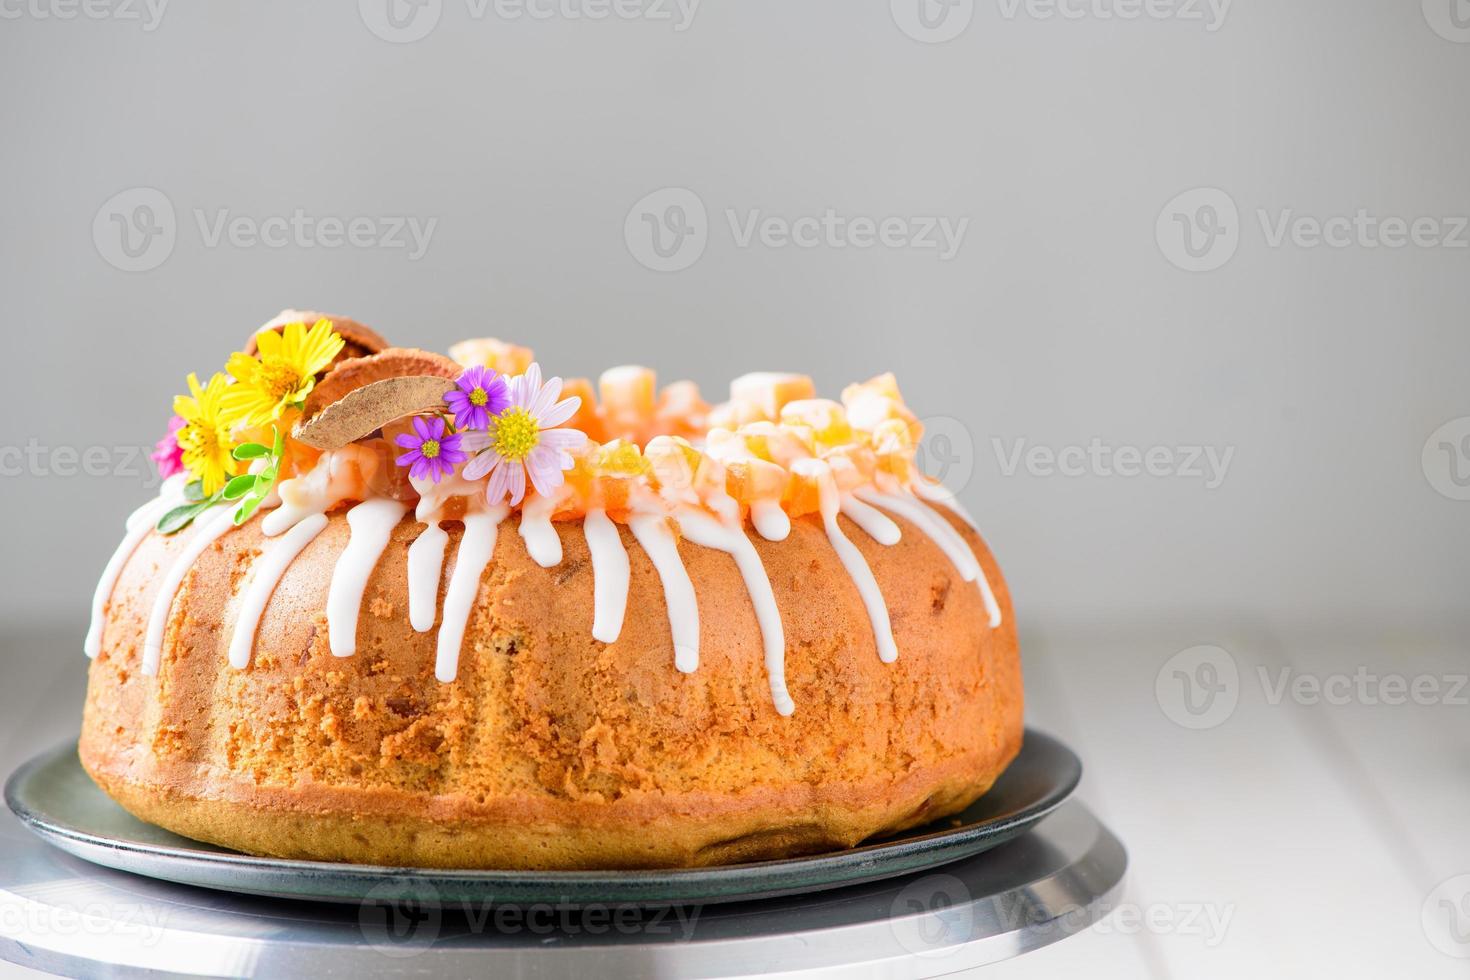 Bael Fruit Cake decorated with small flowers on top, sweet and healthy dessert, homemade cake photo